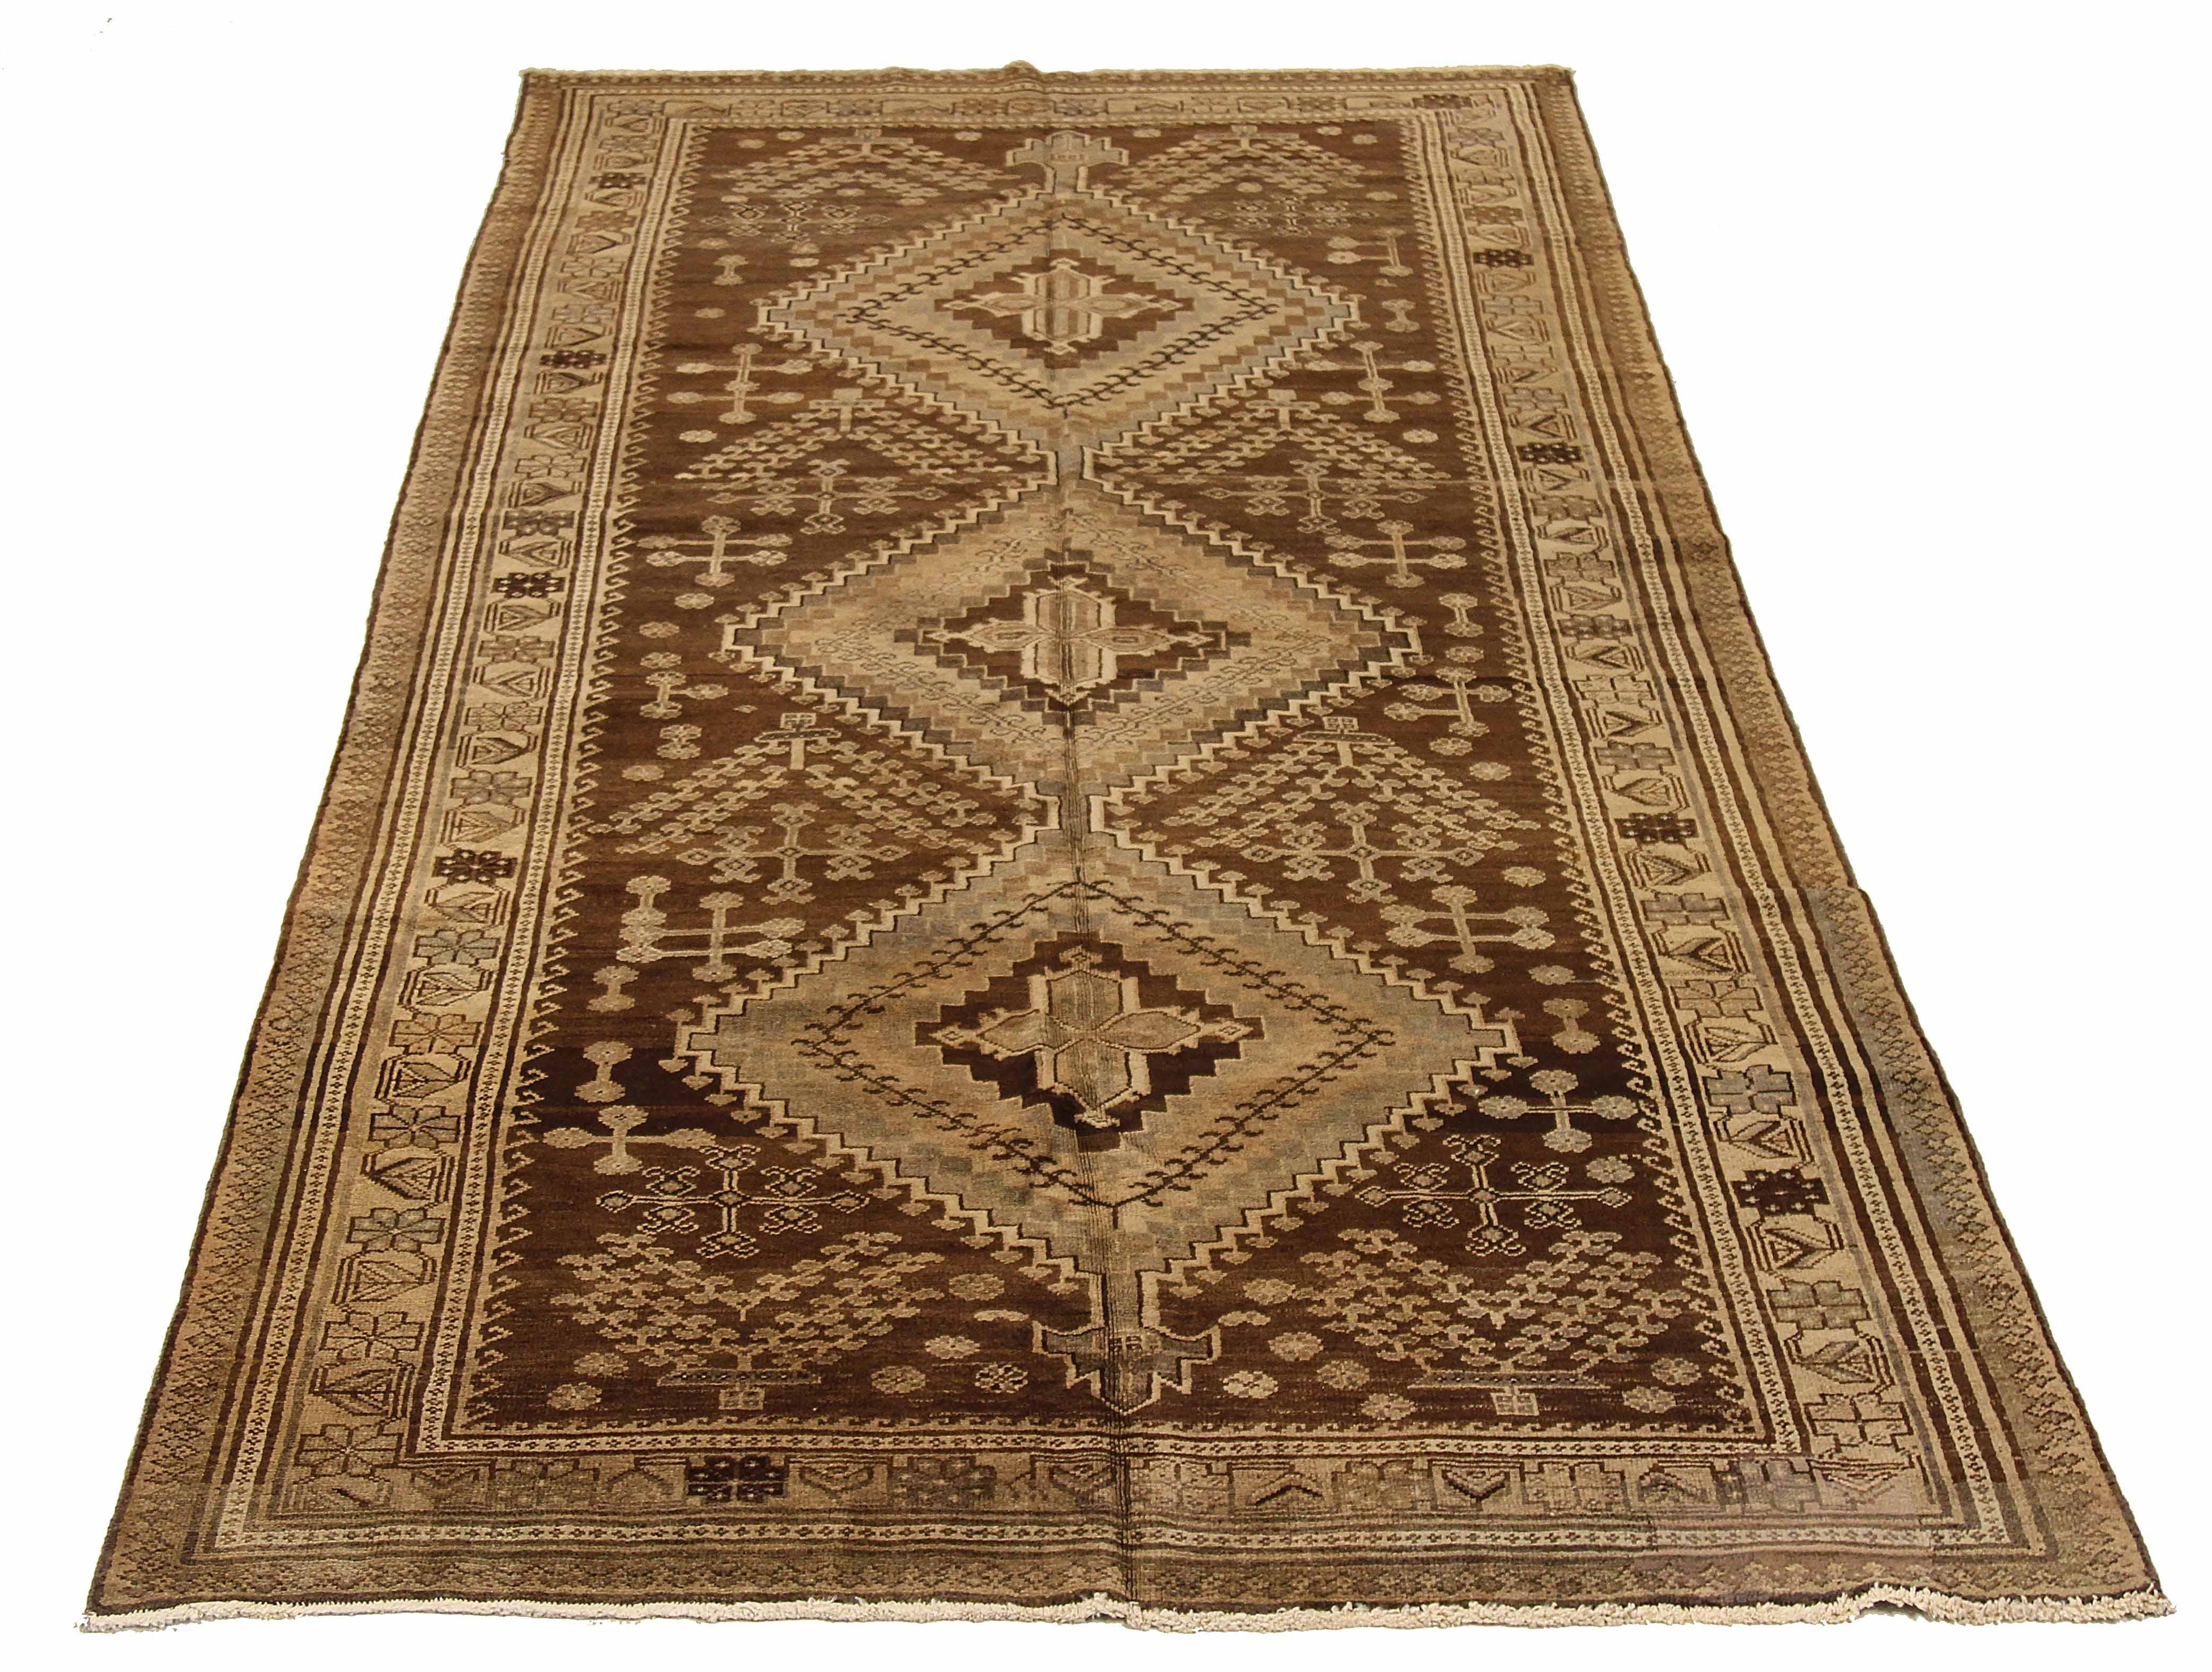 Antique Persian area rug handwoven from the finest sheep’s wool. It’s colored with all-natural vegetable dyes that are safe for humans and pets. It’s a traditional Varamin design handwoven by expert artisans. It’s a lovely area rug that can be